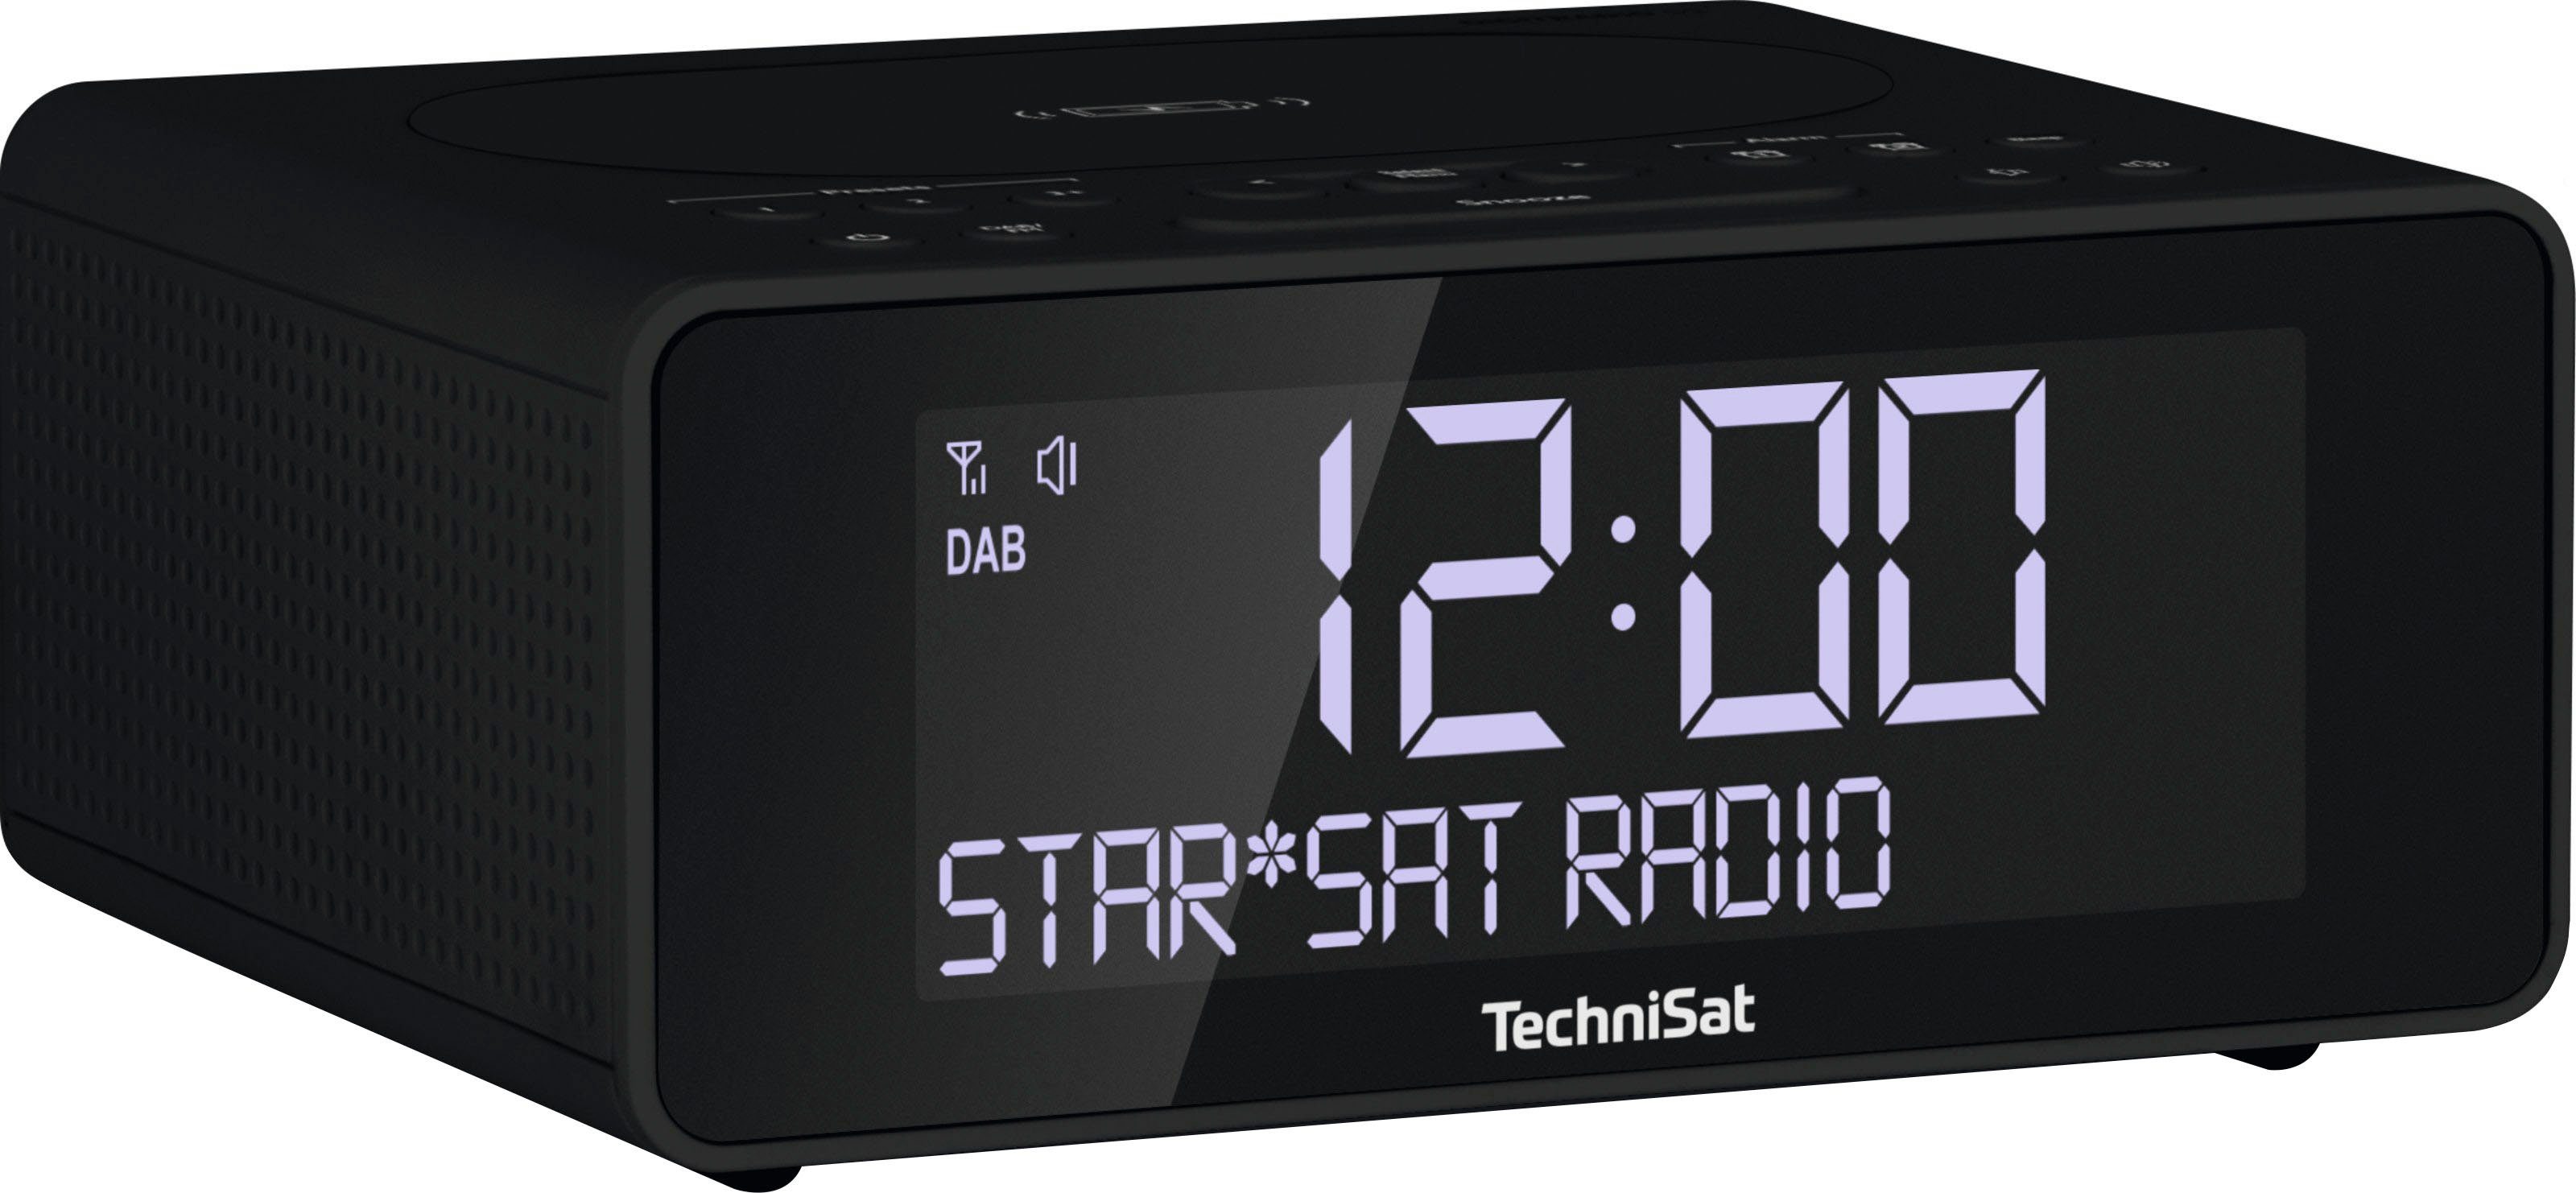 TechniSat Radiowecker »DIGITRADIO 52 Stereo« mit DAB+, Snooze-Funktion, dimmbares Display, Sleeptimer, Wireless Charging-HomeTrends